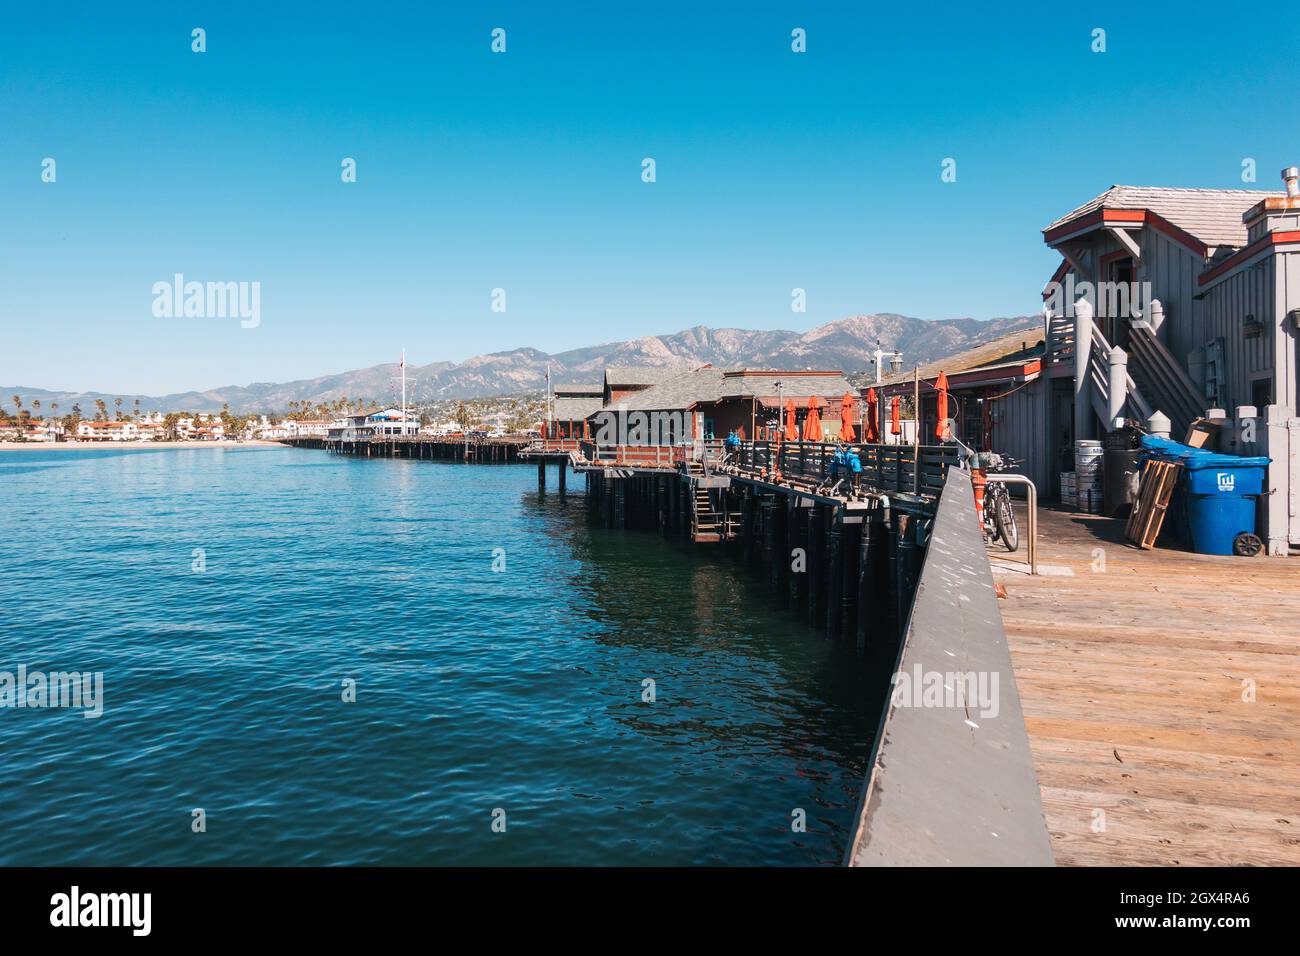 Stearns Wharf in Santa Barbara, CA - an historic wooden pier featuring shops and restaurants Stock Photo